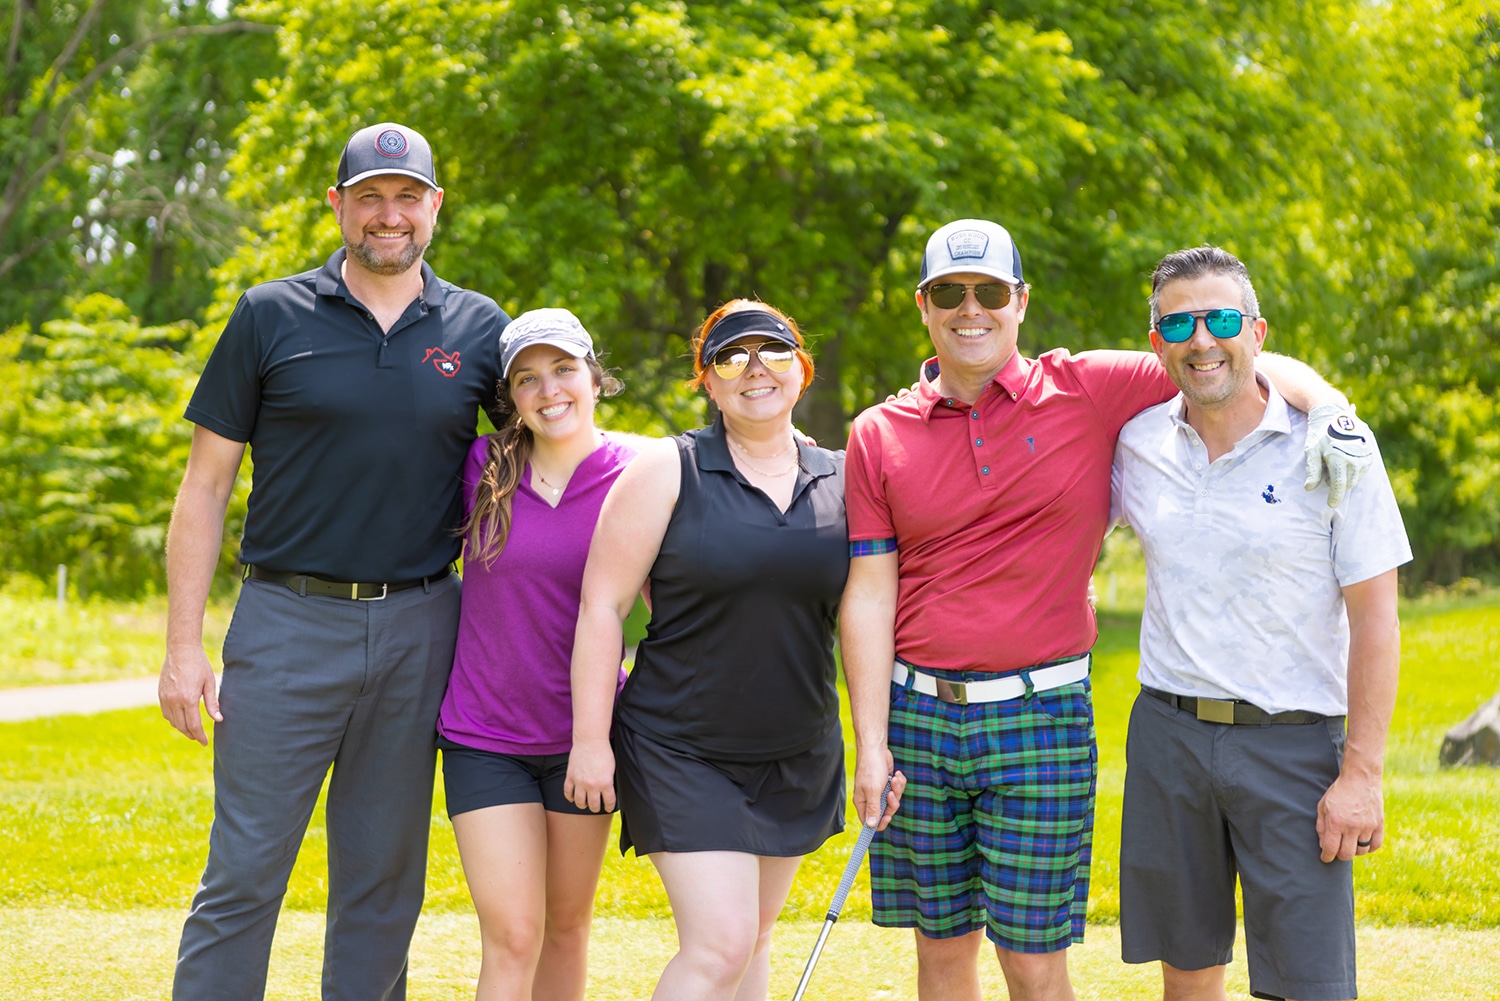 On Monday, May 22, 2023, Community Options, a national nonprofit dedicated to providing housing and employment support to people with intellectual and developmental disabilities, hosted its annual iMatter Golf Classic at Union League Liberty Hill Golf Club in Lafayette Hill, PA.